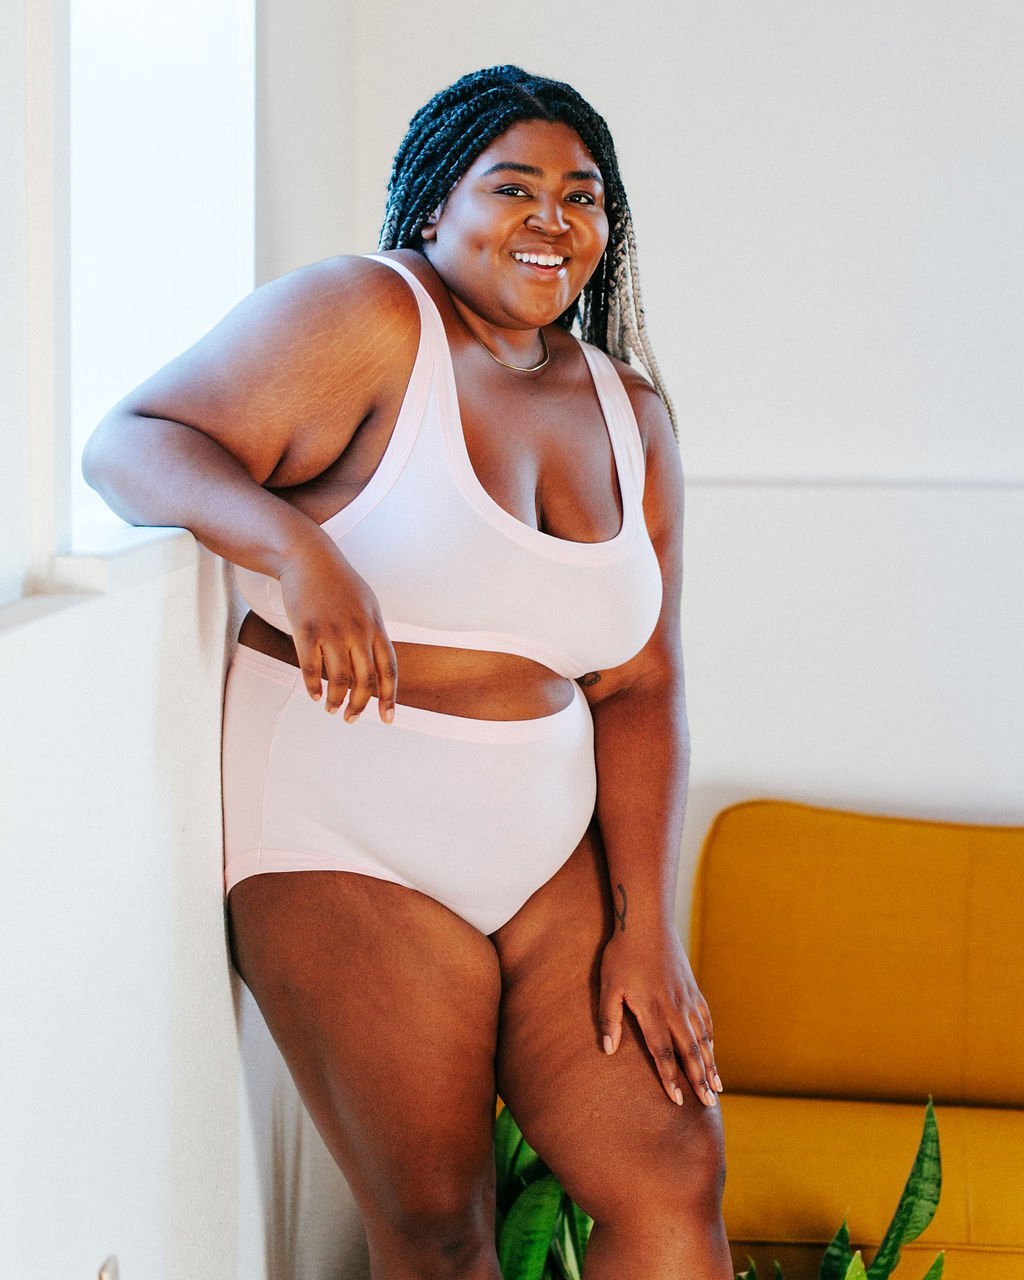 Smiling plus-sized model wearing Thunderpants organic cotton Original style underwear and Bralette in plain Perfect Pink color.